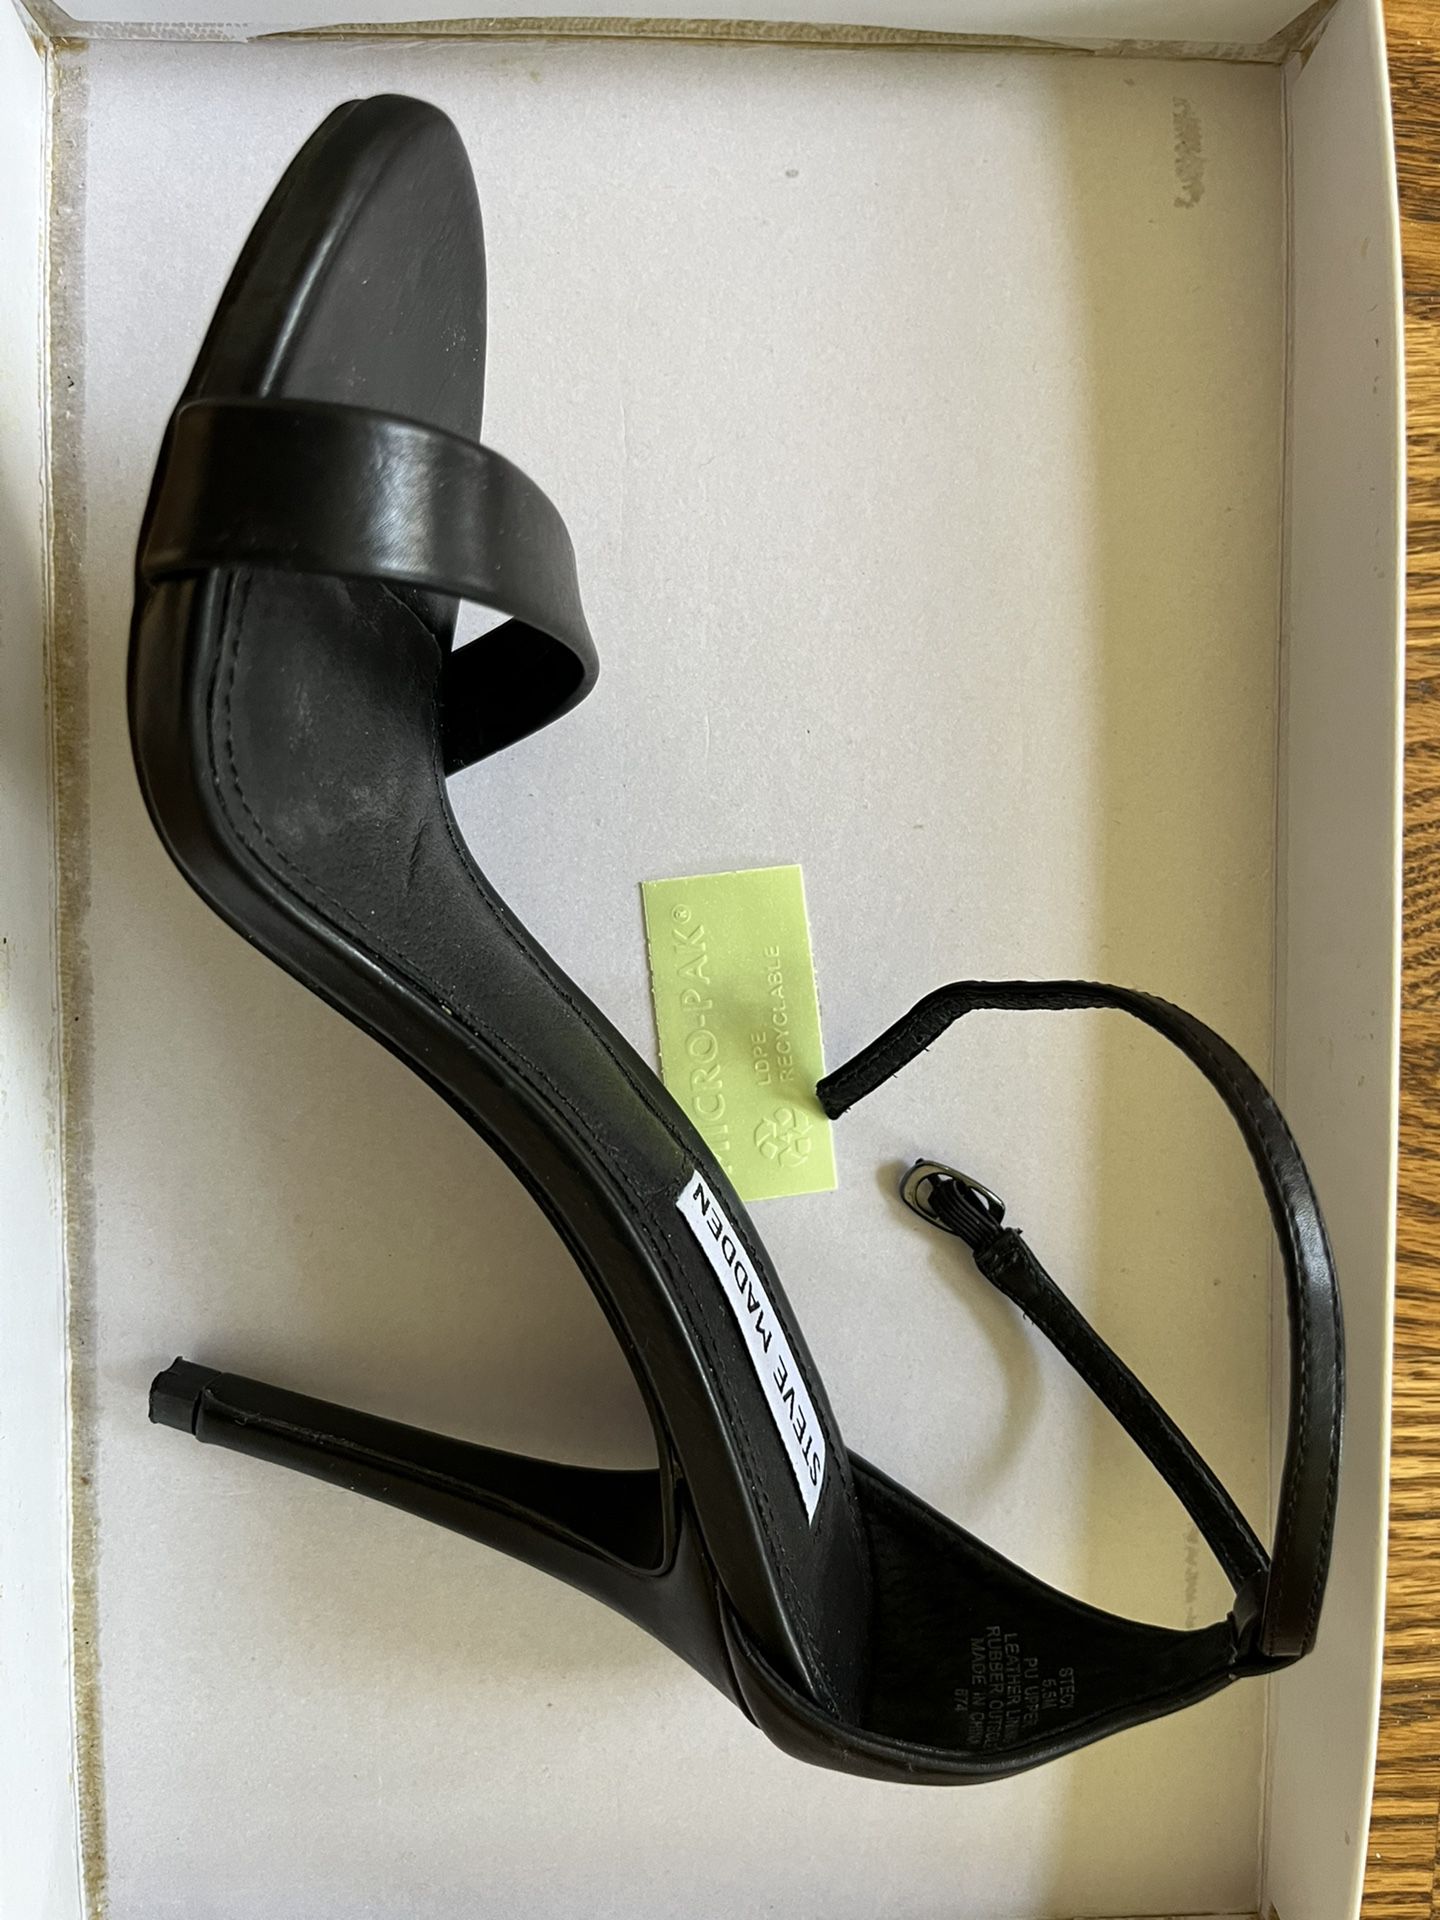 Ankle Strappy Heeled Sandal, Size 5.5